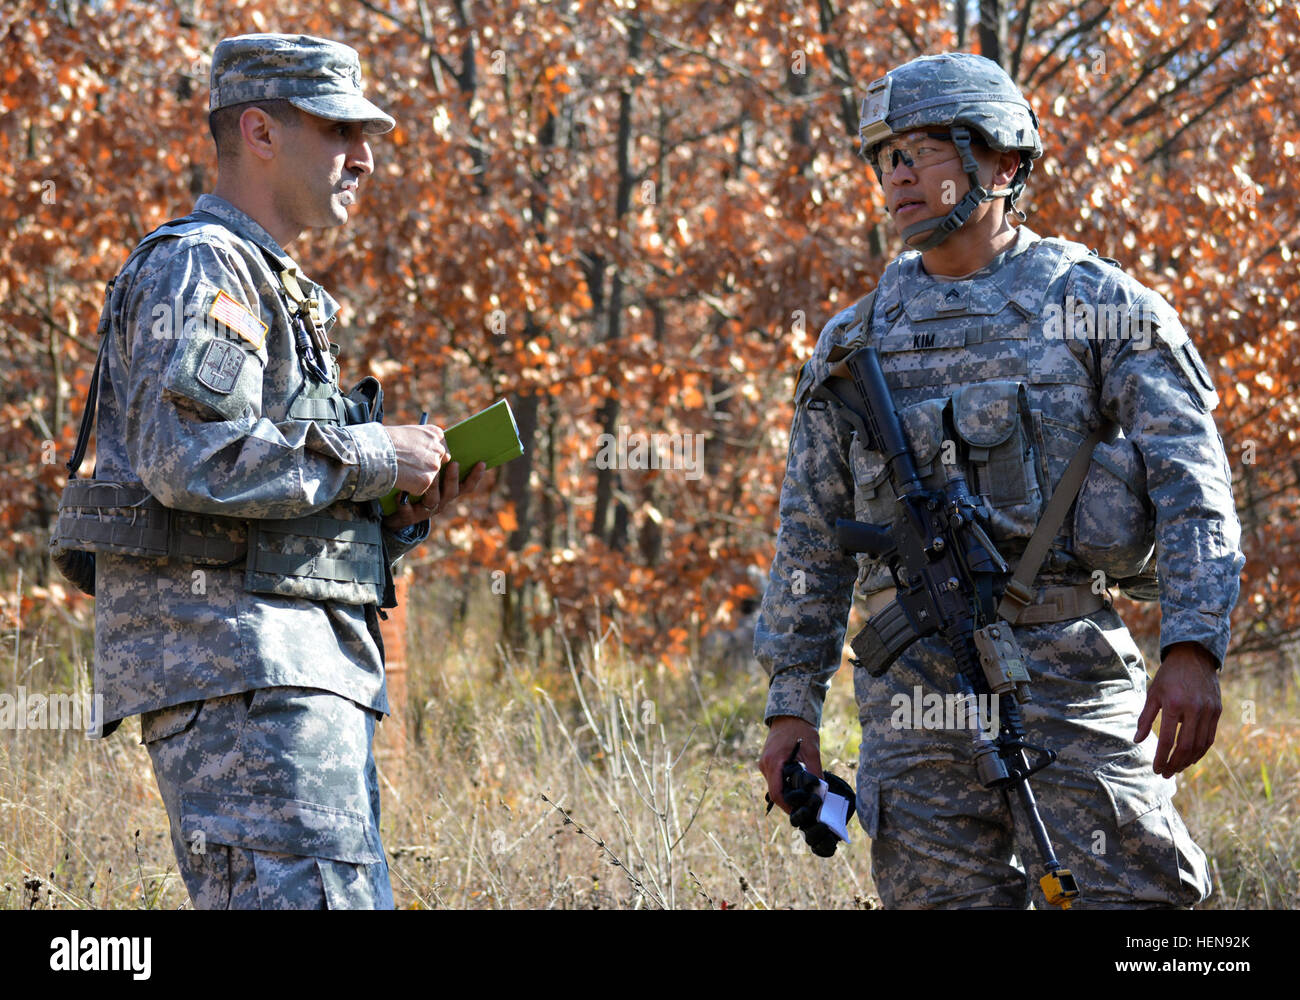 U.S. Army Staff Sgt. Joel Celona, an East Boston, Mass. native and a cadre member with the 7th Noncommissioned Officers Academy, conducts an after action review with U.S. Army Cpl. Hee Beom Kim, a Joint Regional Detachment-East soldier and a native of Saipan, at the conclusion of a situational training exercise at Camp Bondsteel Nov. 22. Celona was one of five cadre members from the 7th NCOA who came to Kosovo from Grafenwoehr, Germany, to run the Warrior Leaders Course. (U.S. Army photo by Capt. Randy Ready, 4th Public Affairs Detachment) KFOR soldiers take the next step as leaders 131122-A-C Stock Photo